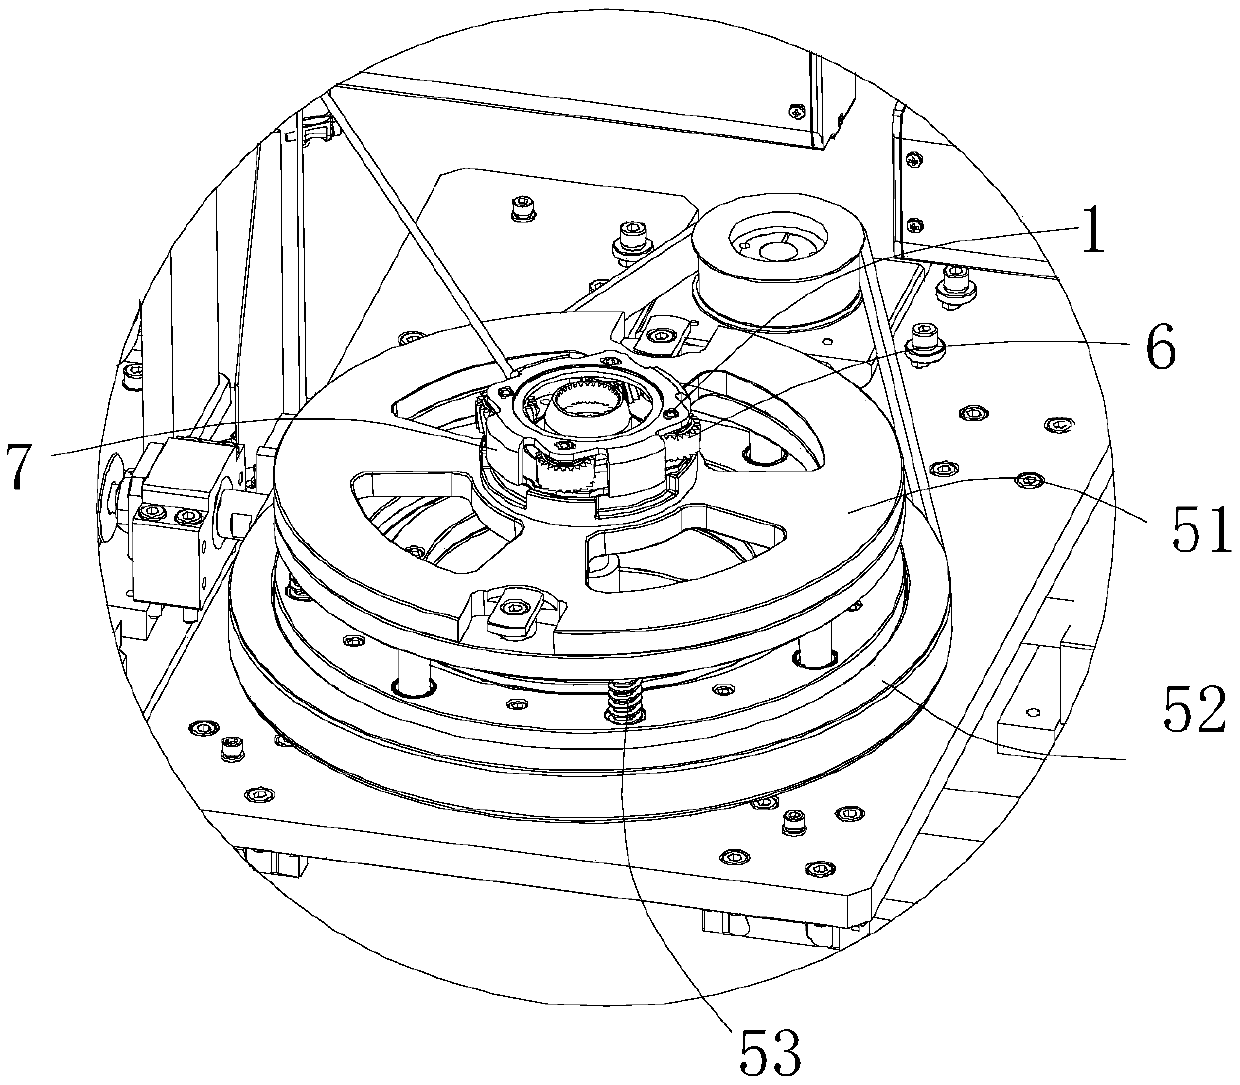 Planetary shaft, limiting device and planetary wheel assembly device